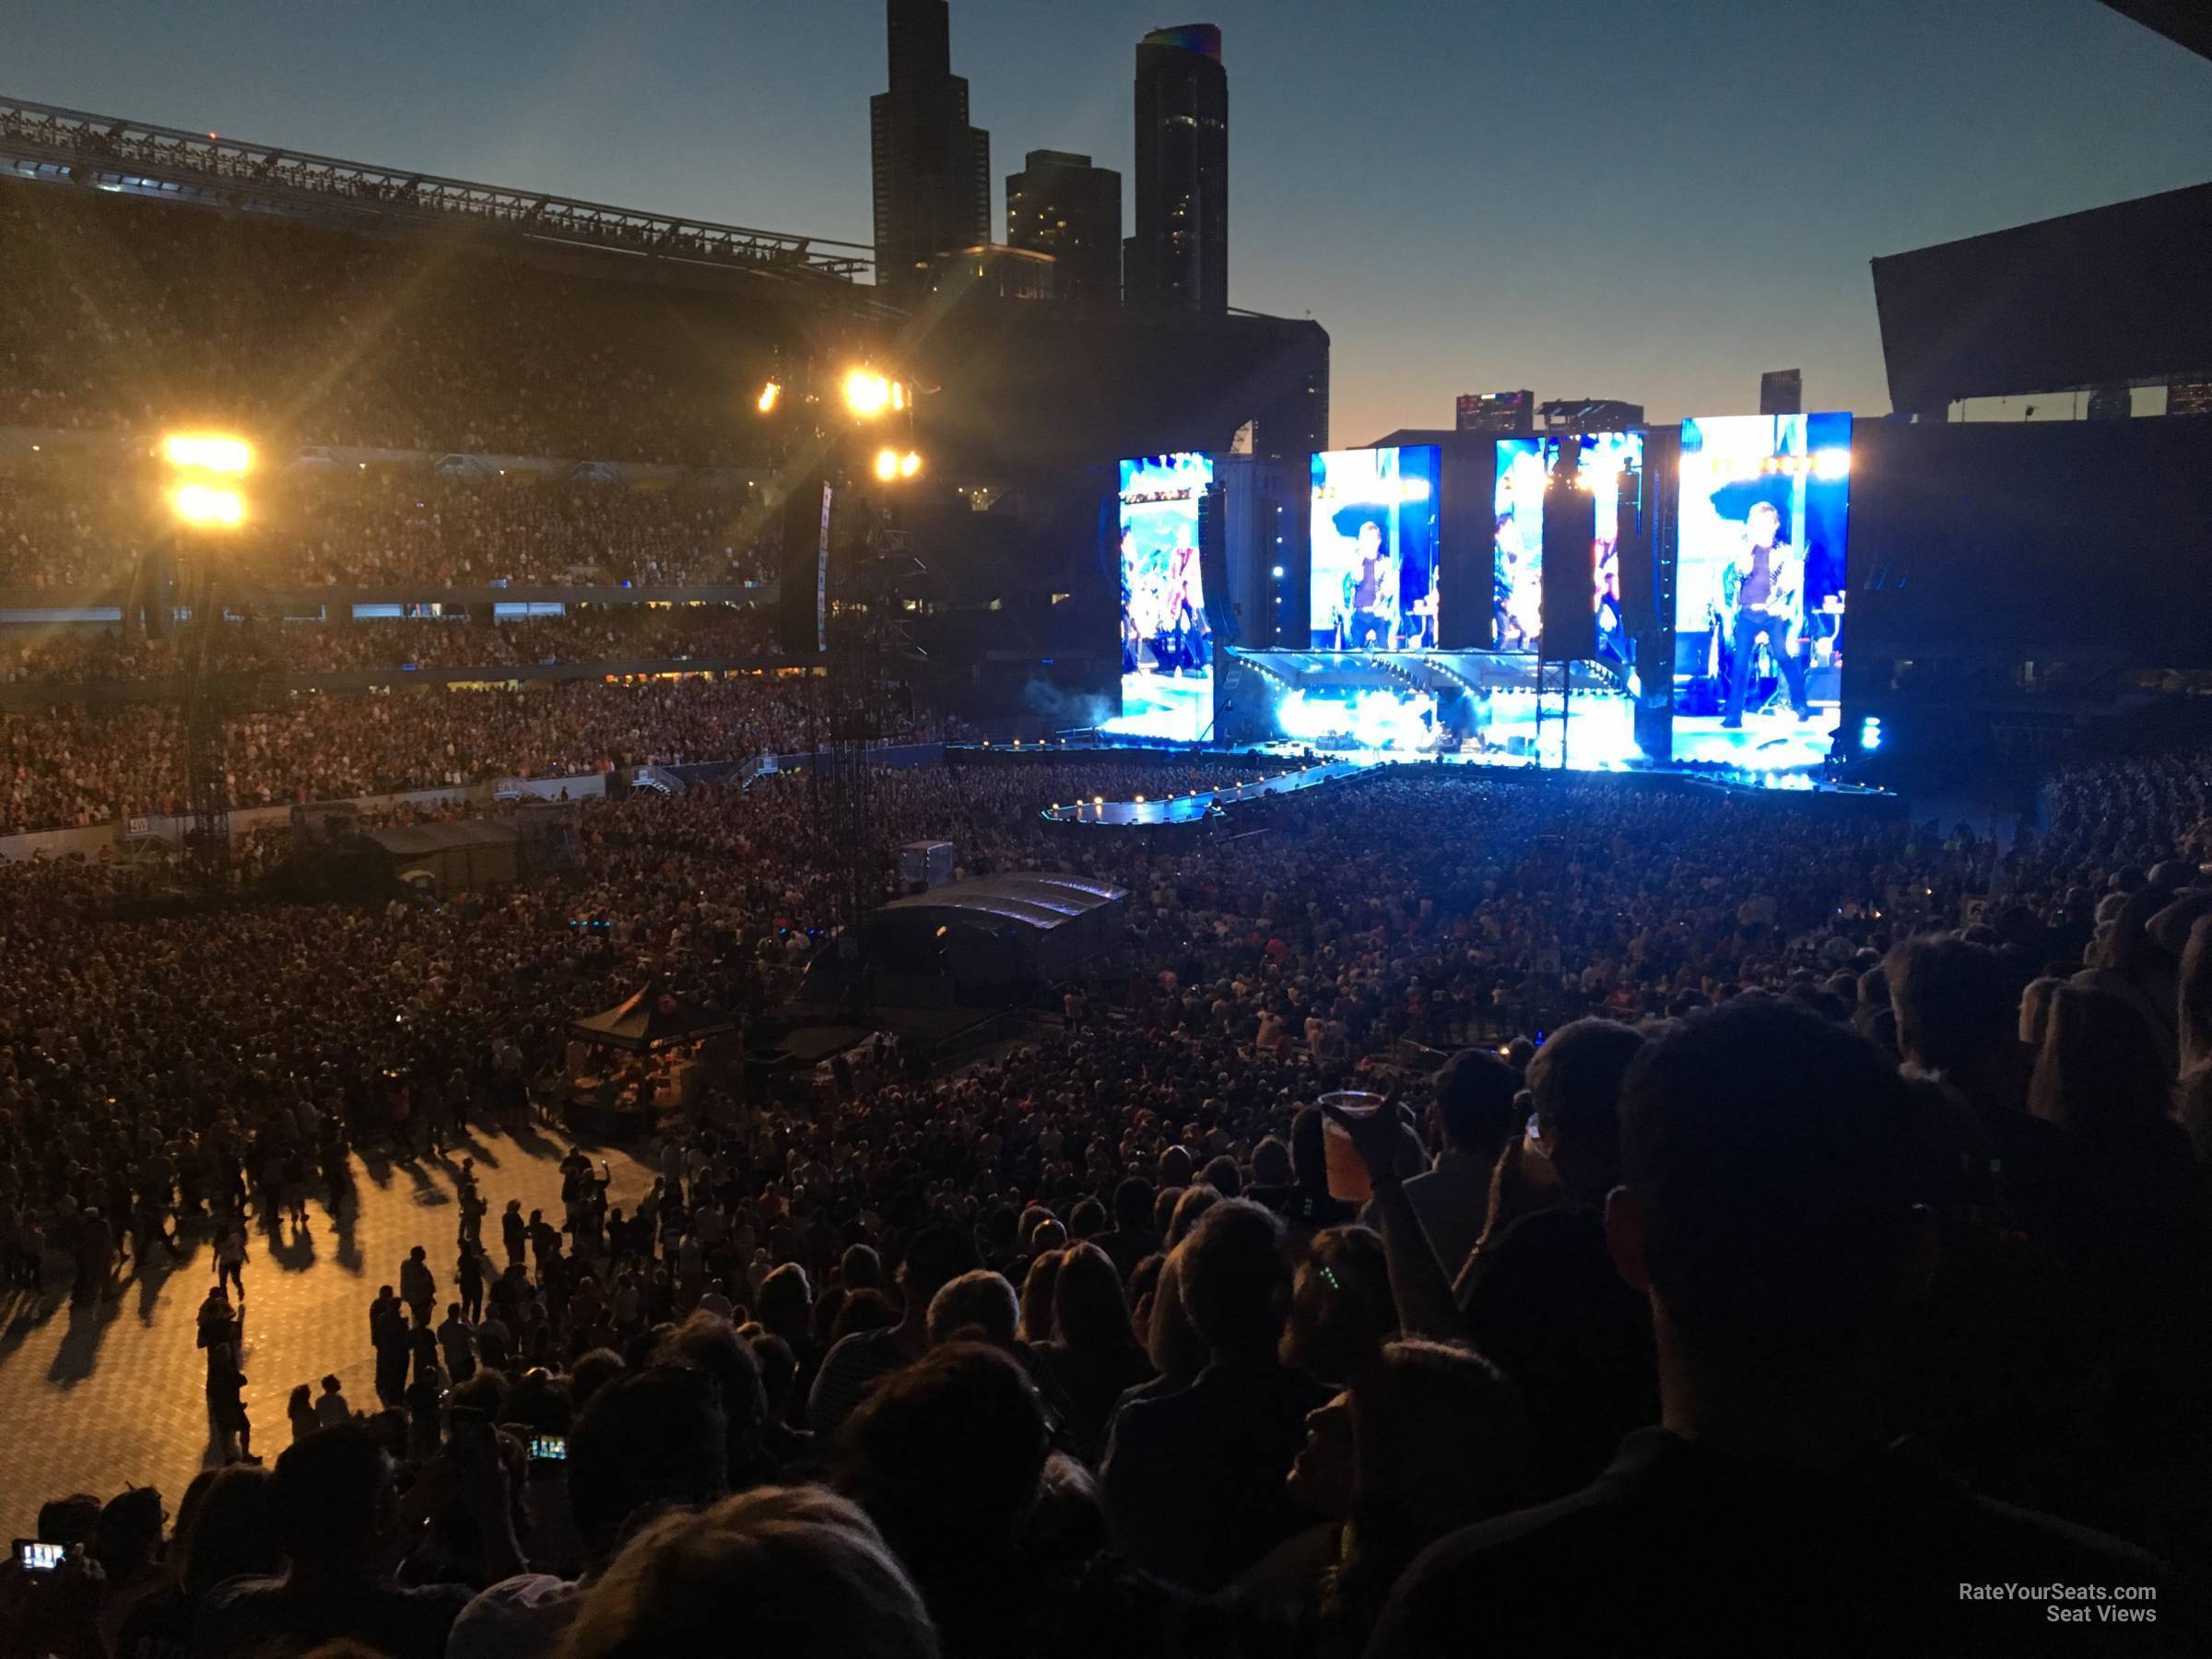 section 215, row 10 seat view  for concert - soldier field